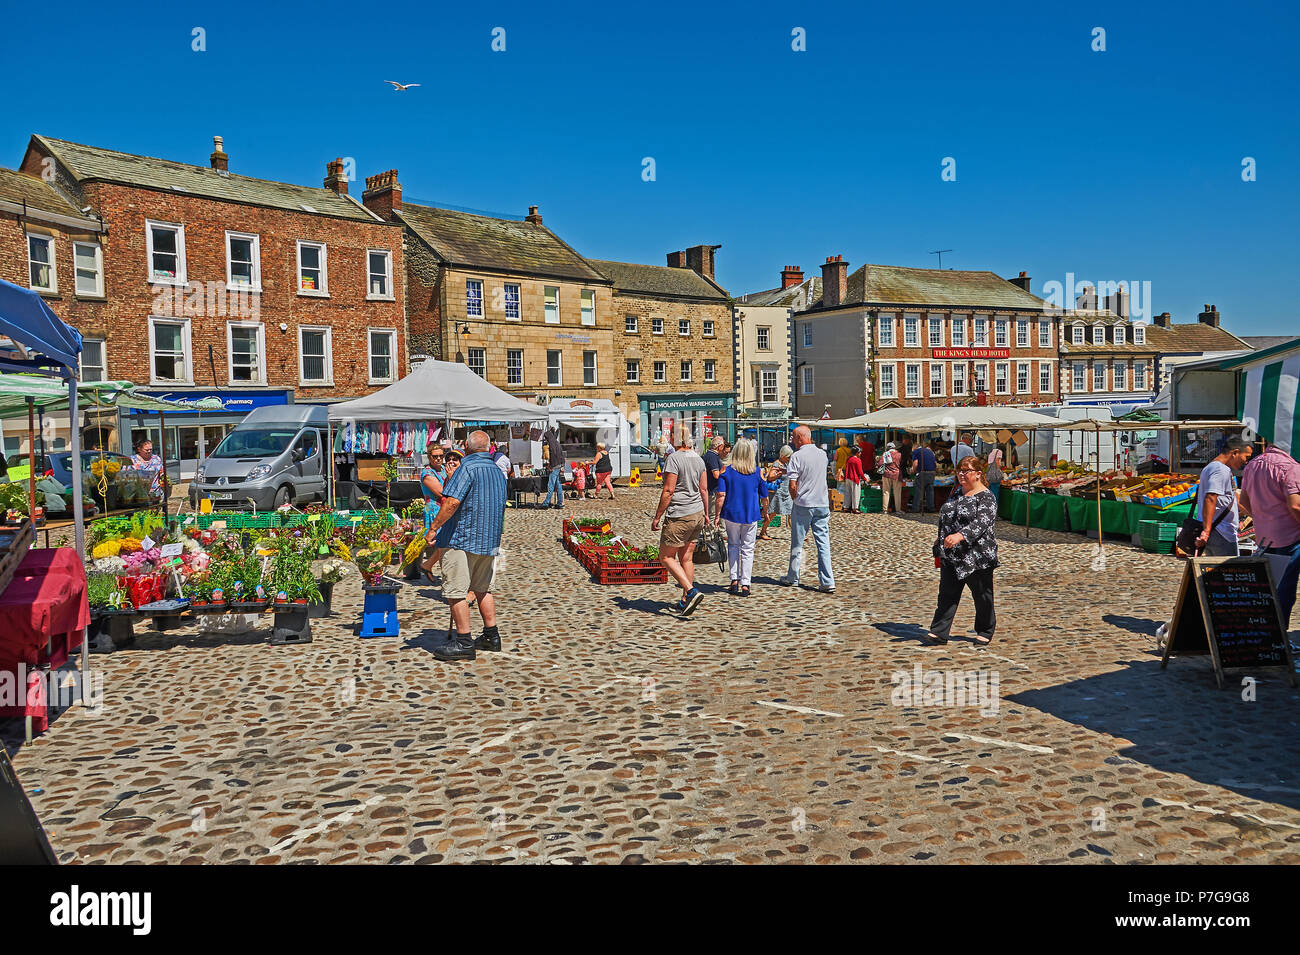 Ornate buildings line the market square in the centre of the North Yorkshire market town of Richmond. Stock Photo